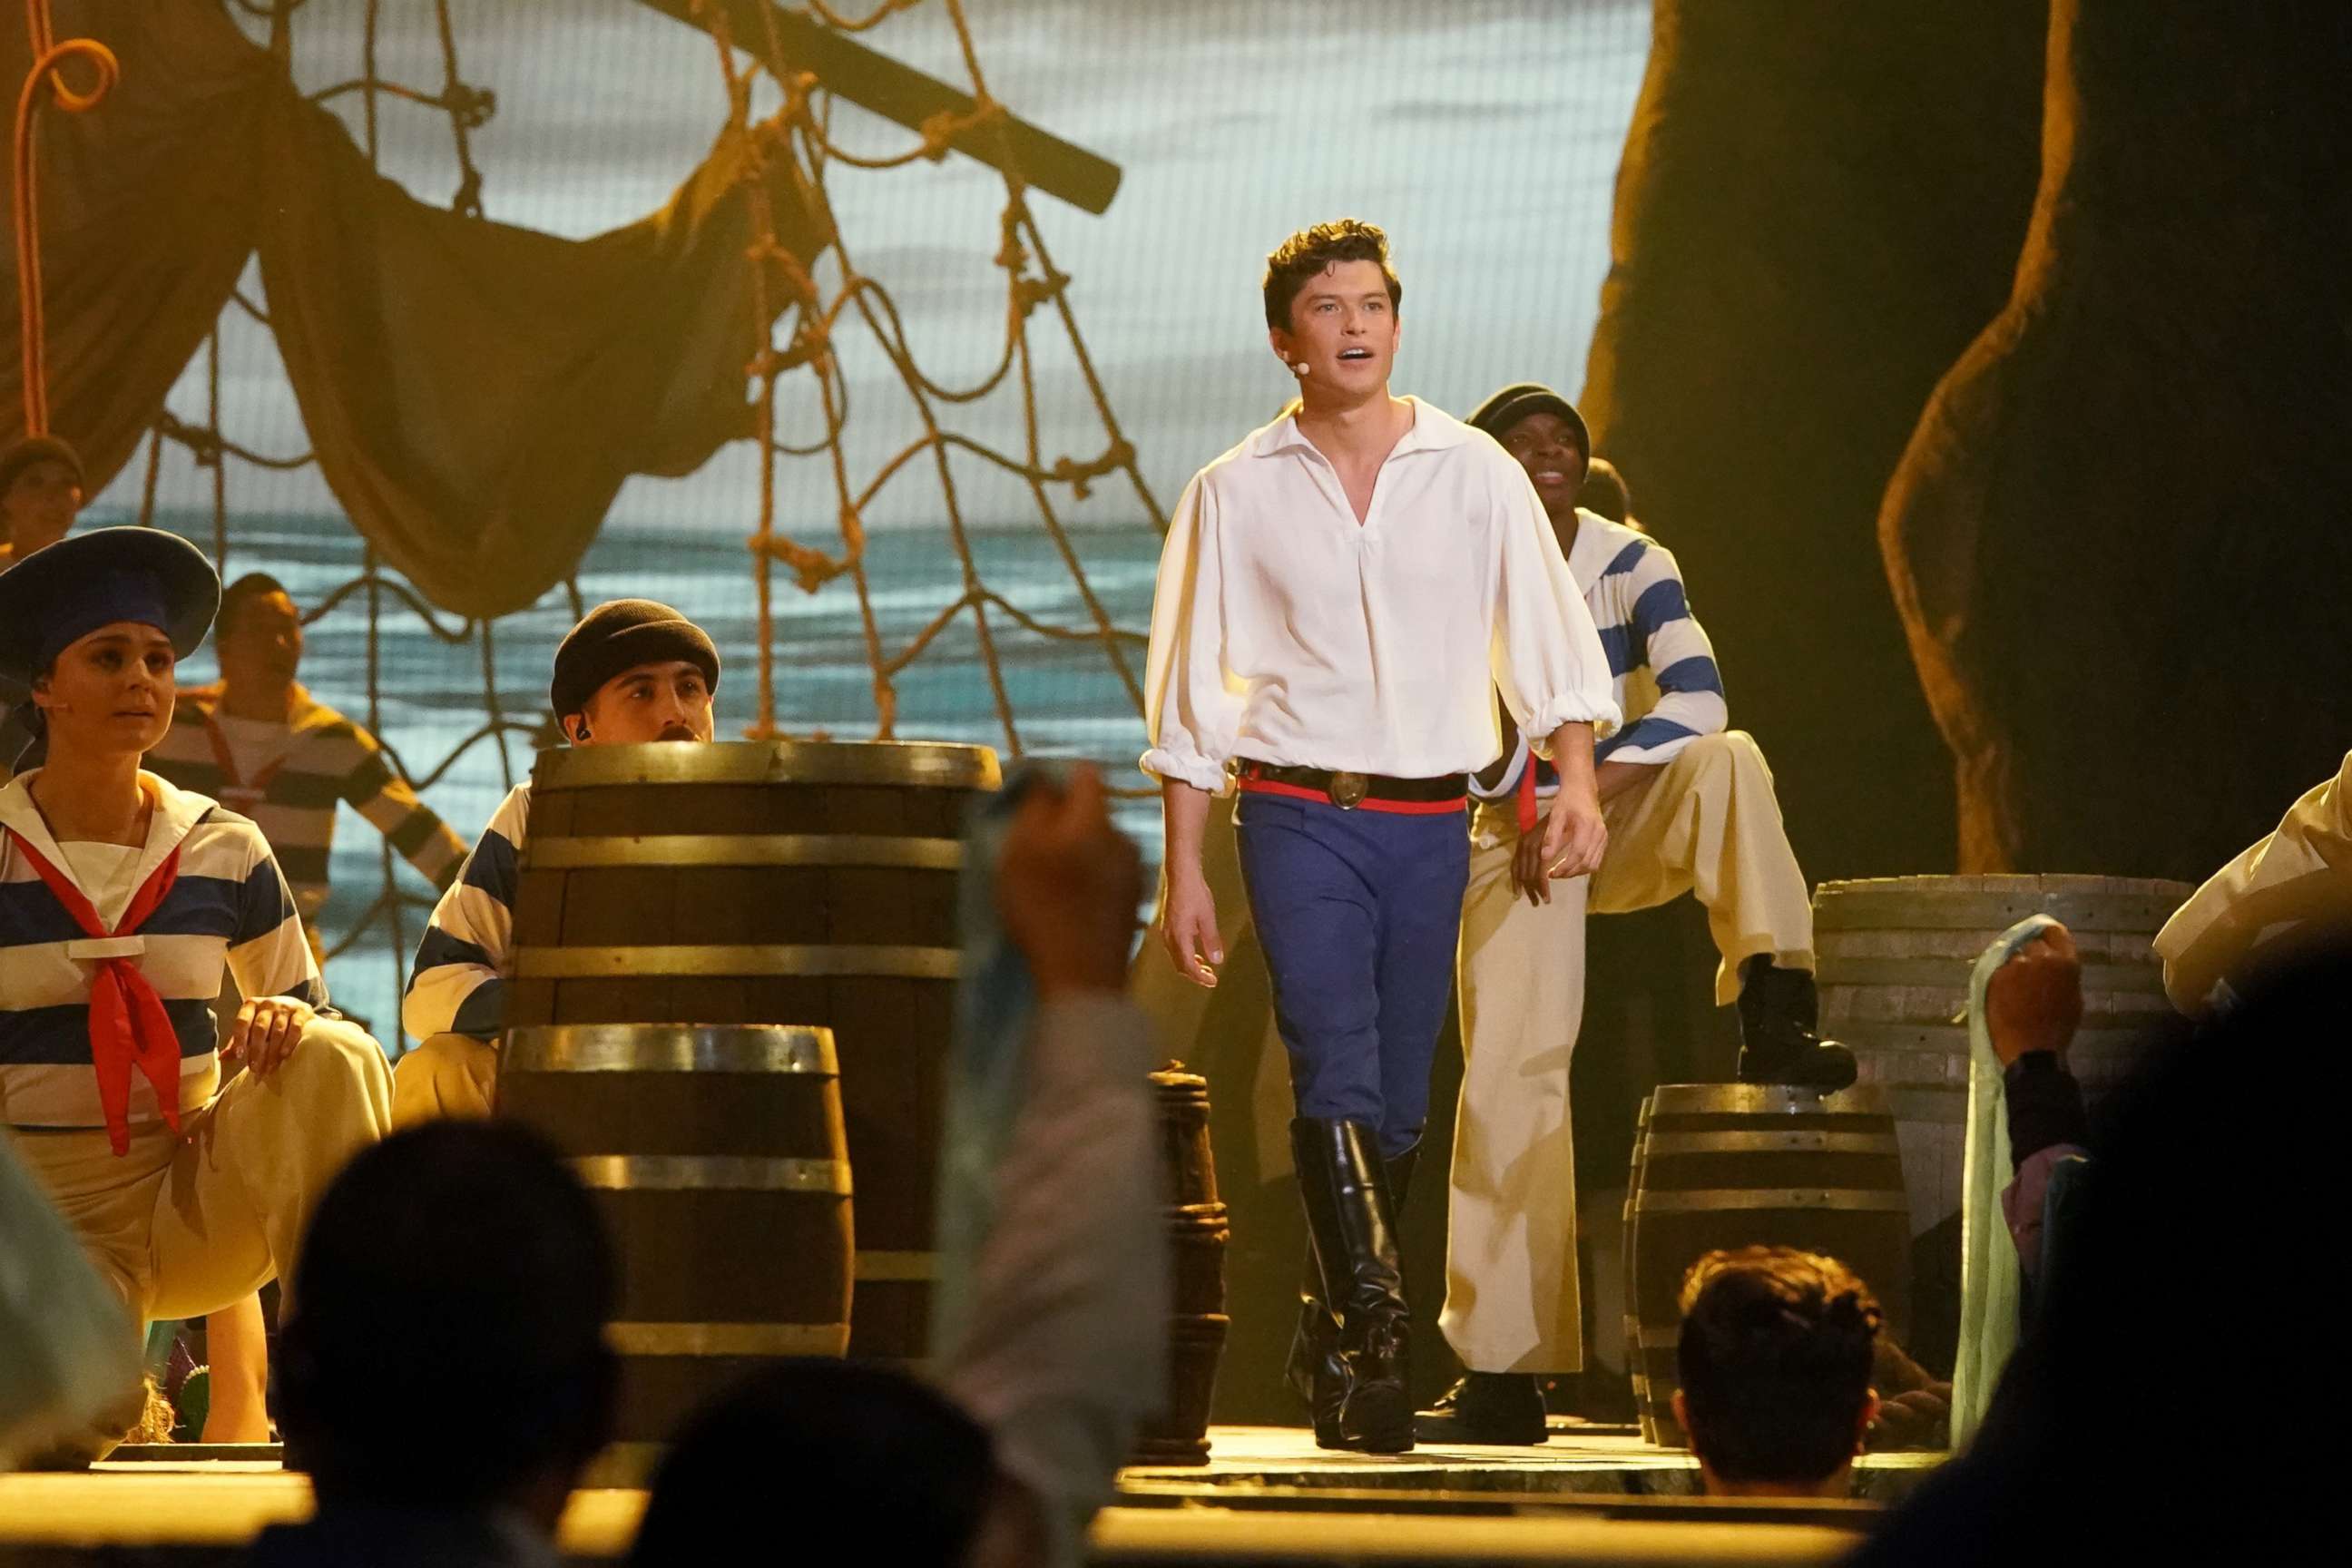 PHOTO: Graham Phillips, as Prince Eric, performs in the live musical event showcasing "The Little Mermaid" on ABC.